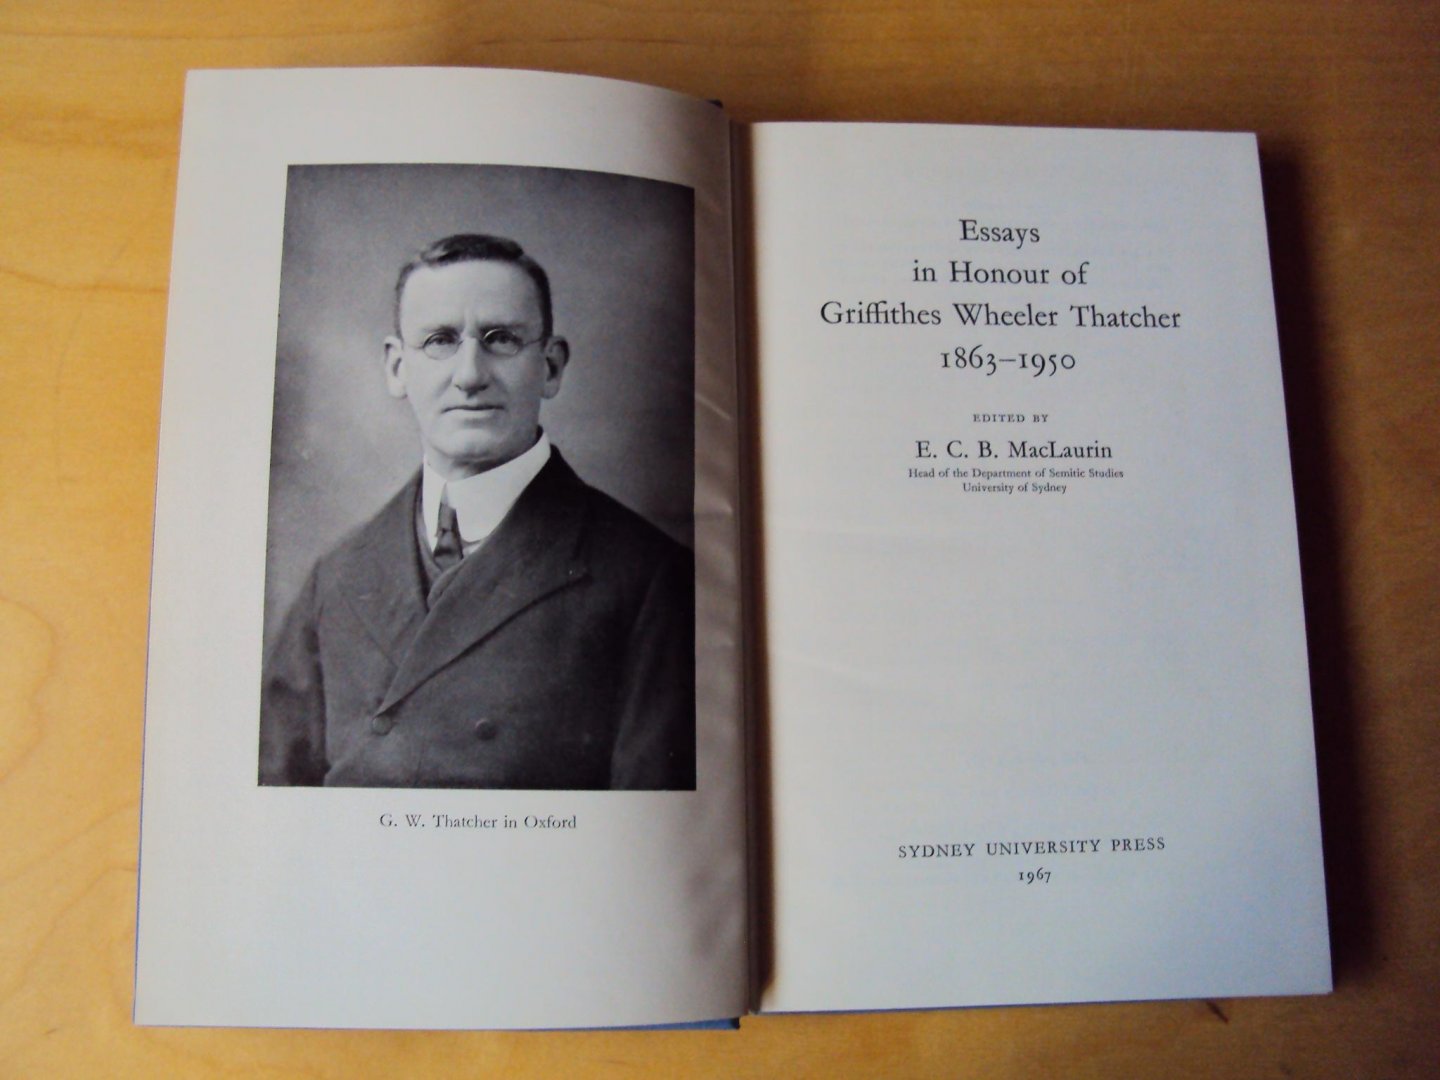 MacLaurin, E.C.B. - Essays in Honour of G.W. Thatcher